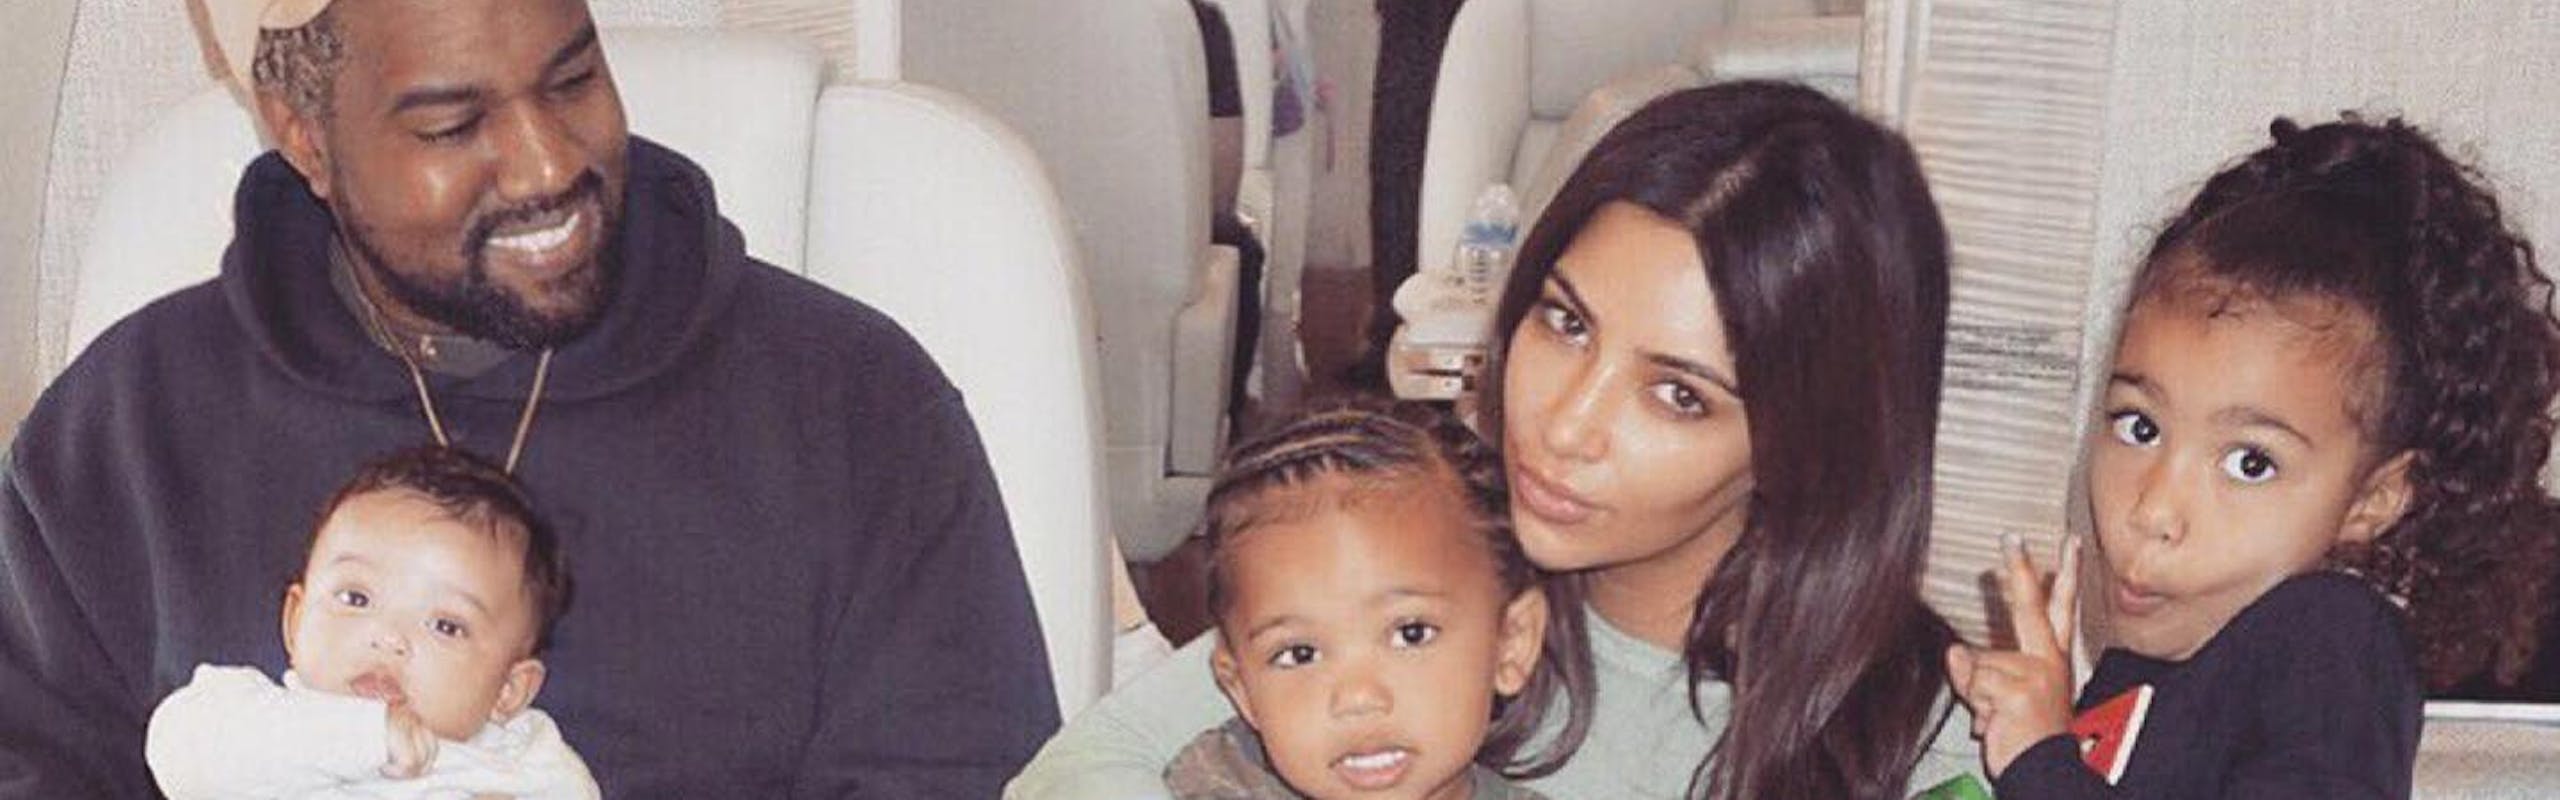 Kim Kardashian with Kanye West with their children, North West, Chicago West, and Saint West on an airplane.